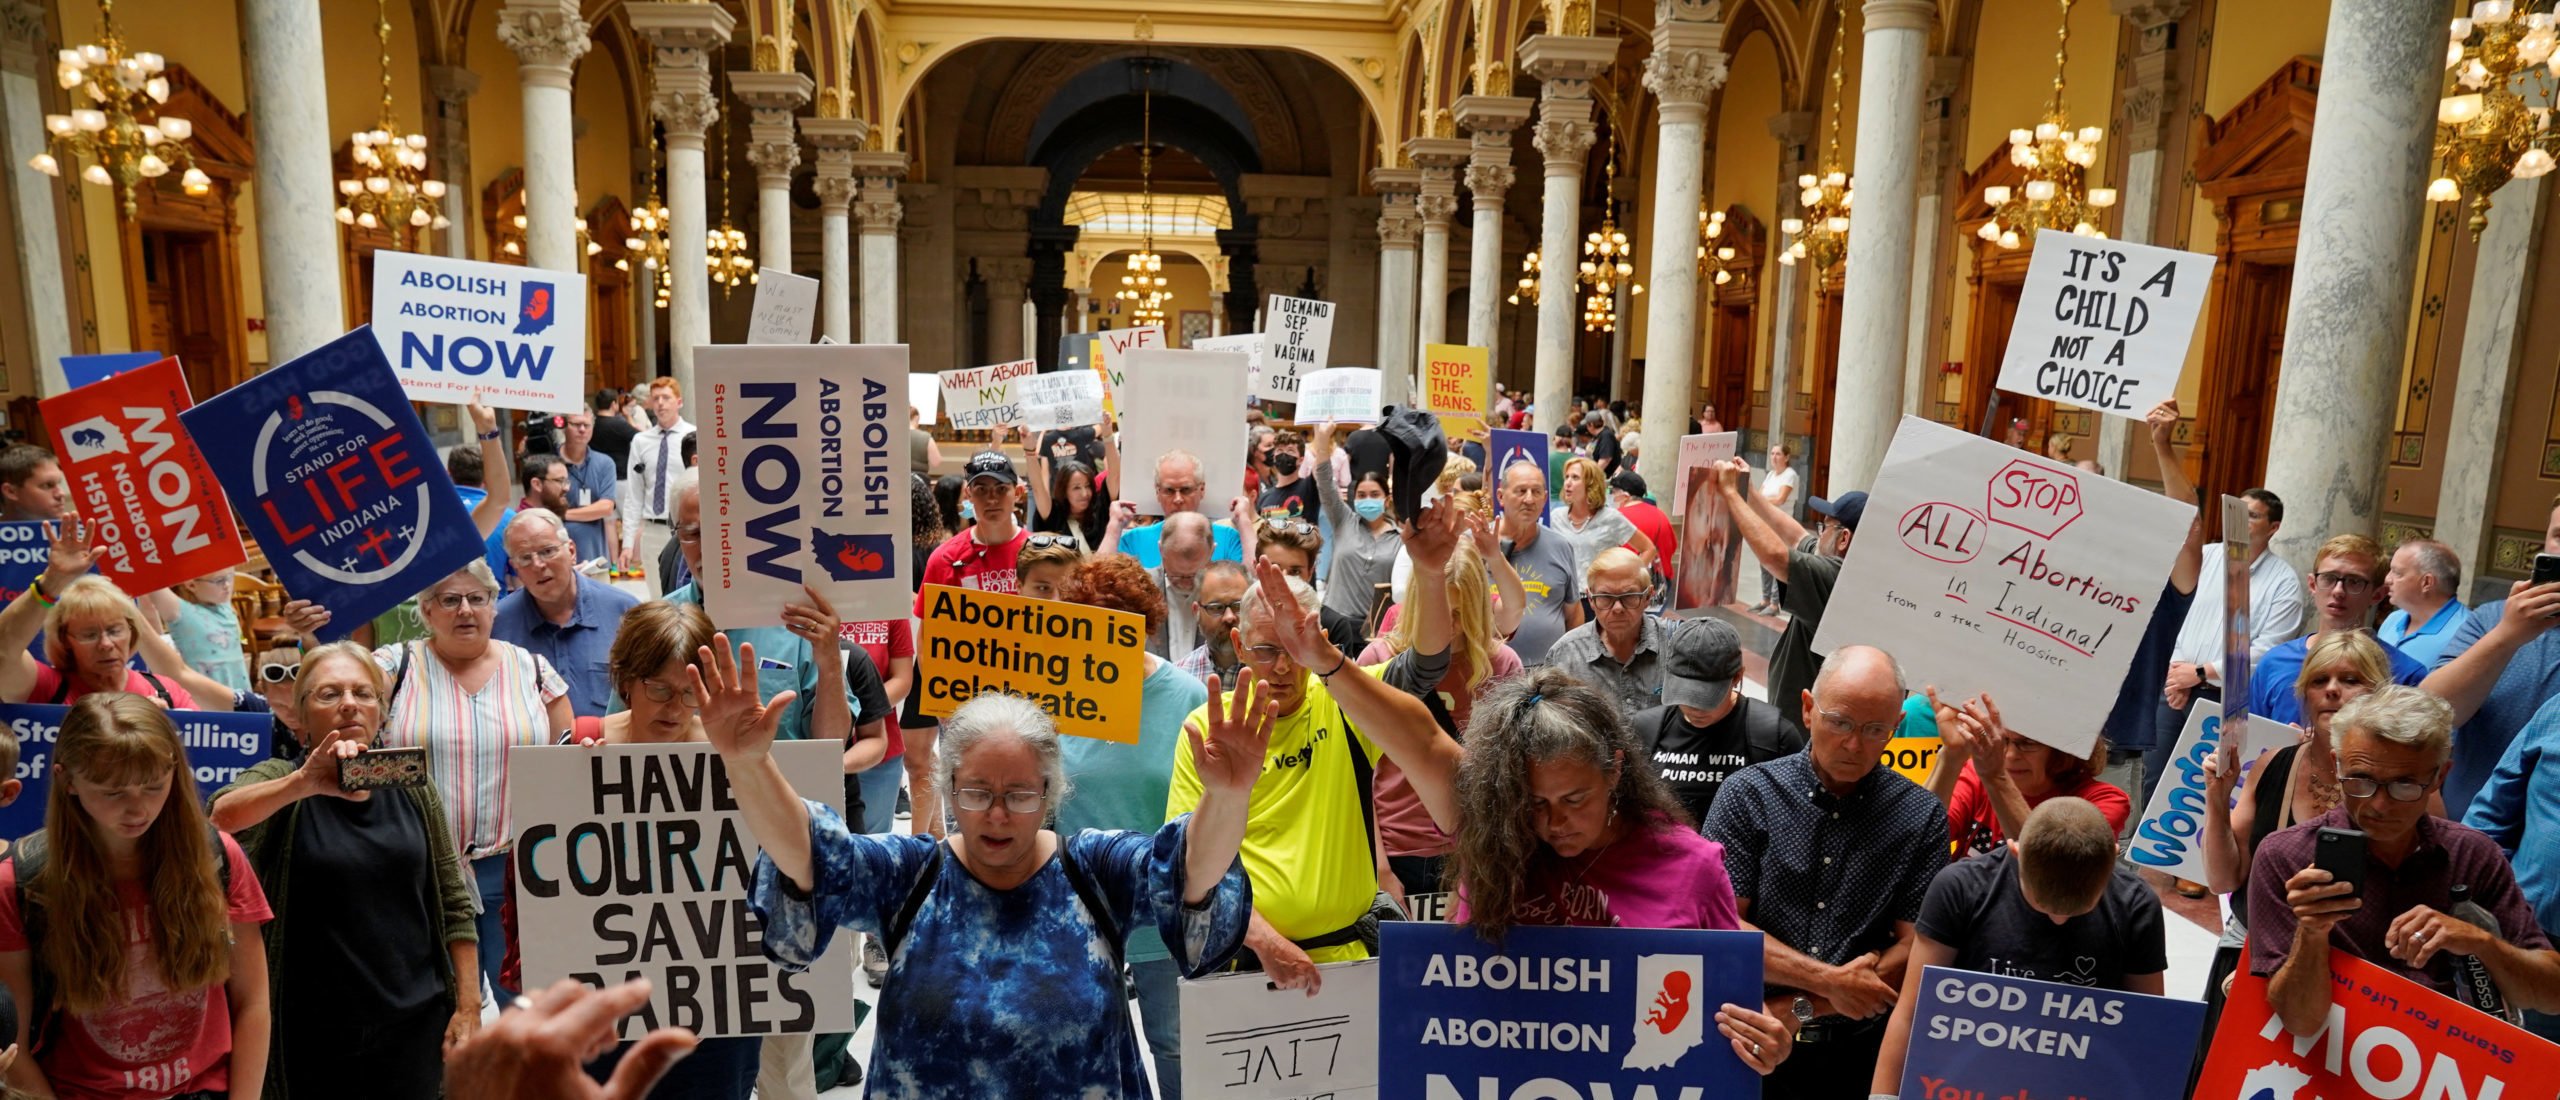 Anti-abortion activists pray in the Indiana Statehouse during a special session debating on banning abortion in Indianapolis, Indiana, U.S. July 25, 2022.